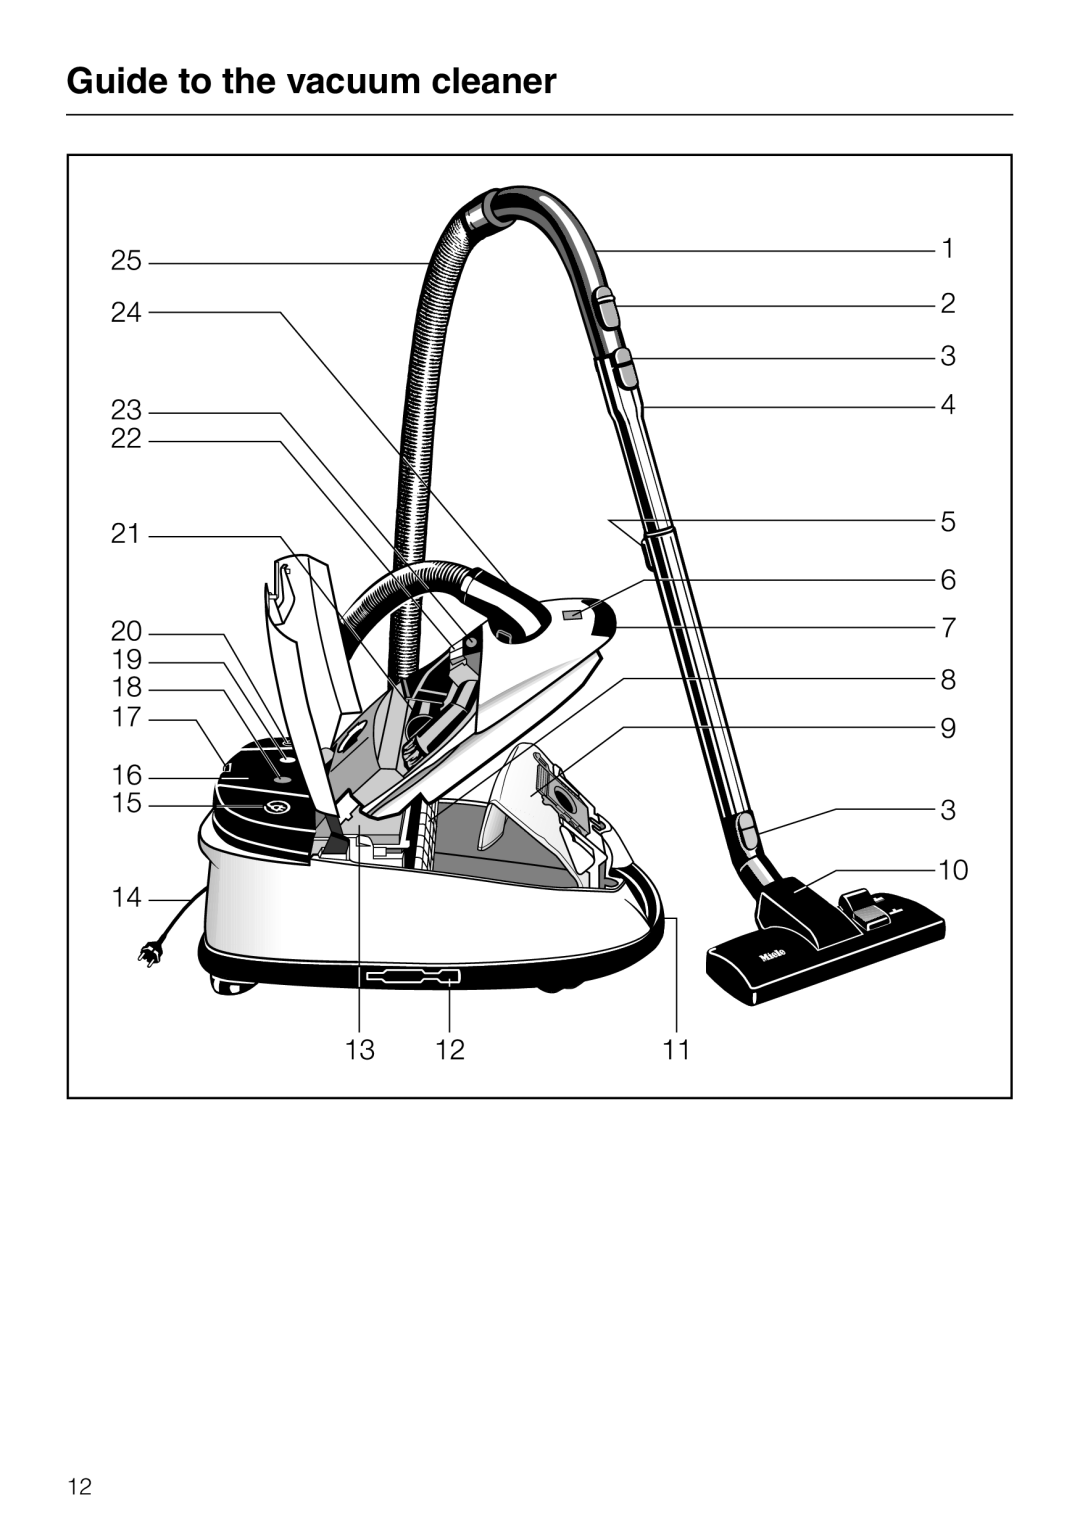 Miele S 600, S 648, S 548, S 500 operating instructions Guide to the vacuum cleaner 